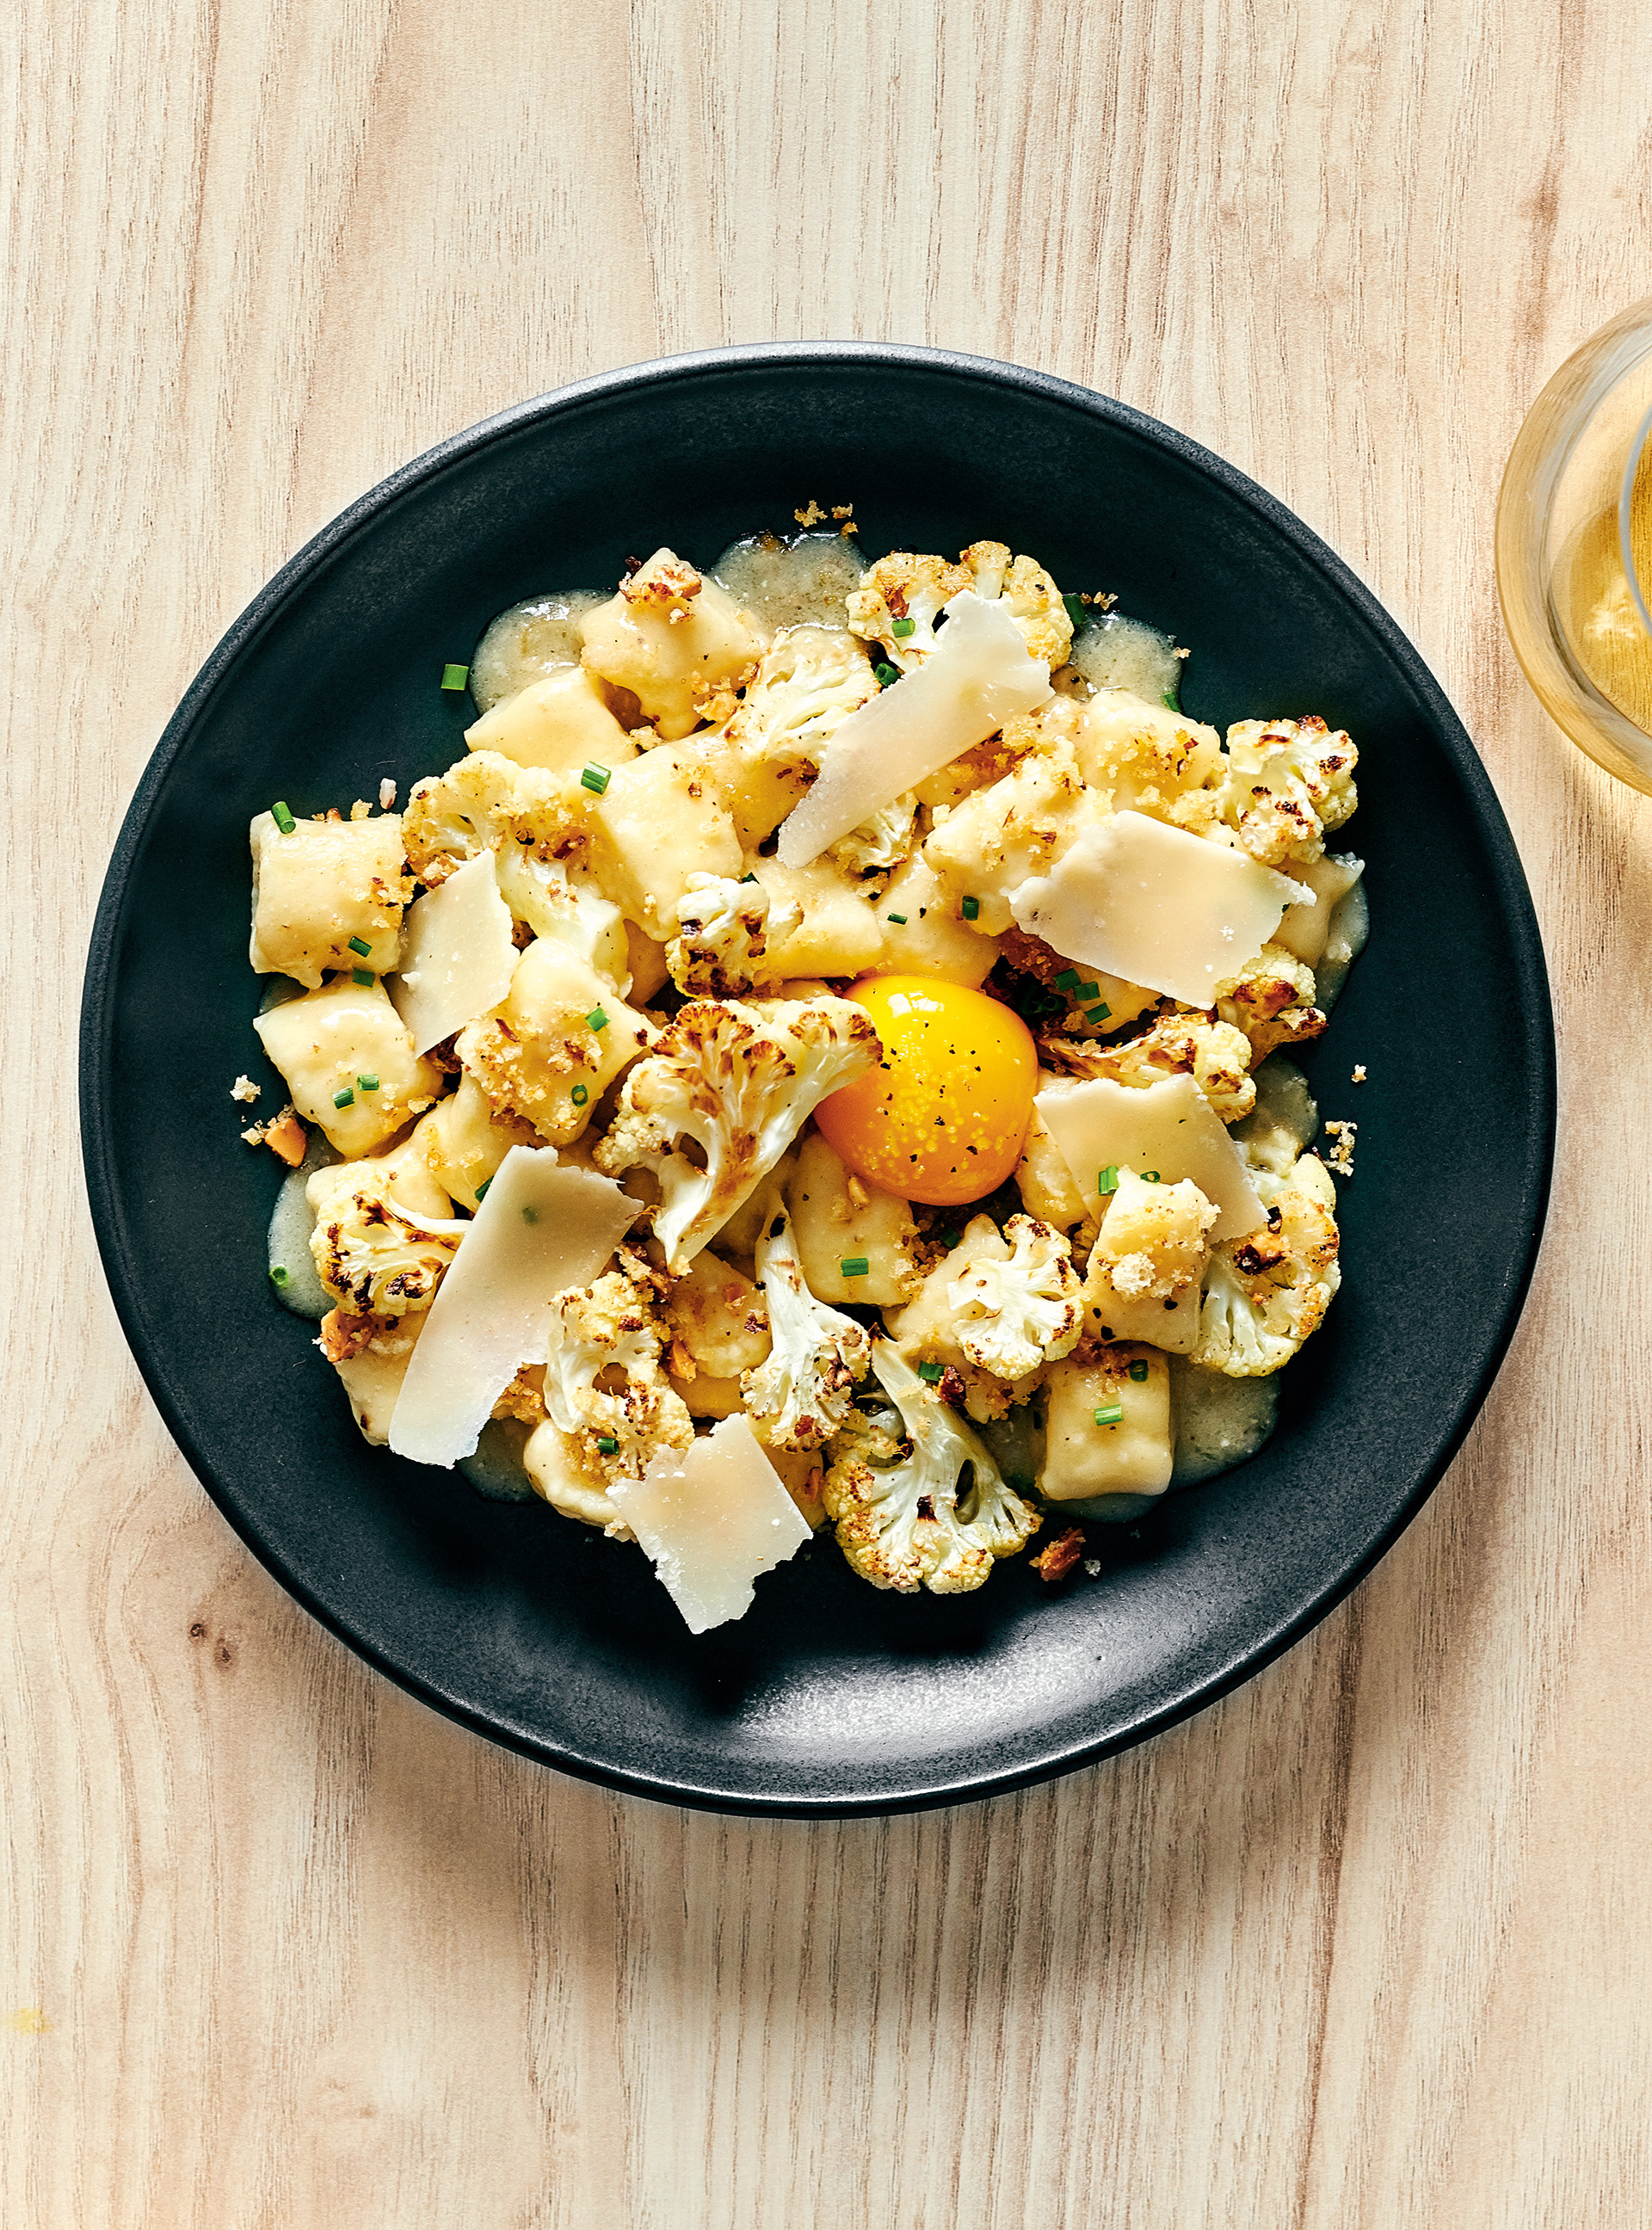 Ricotta Gnocchi with Caramelized Cauliflower and Crunchy Almond Crumble